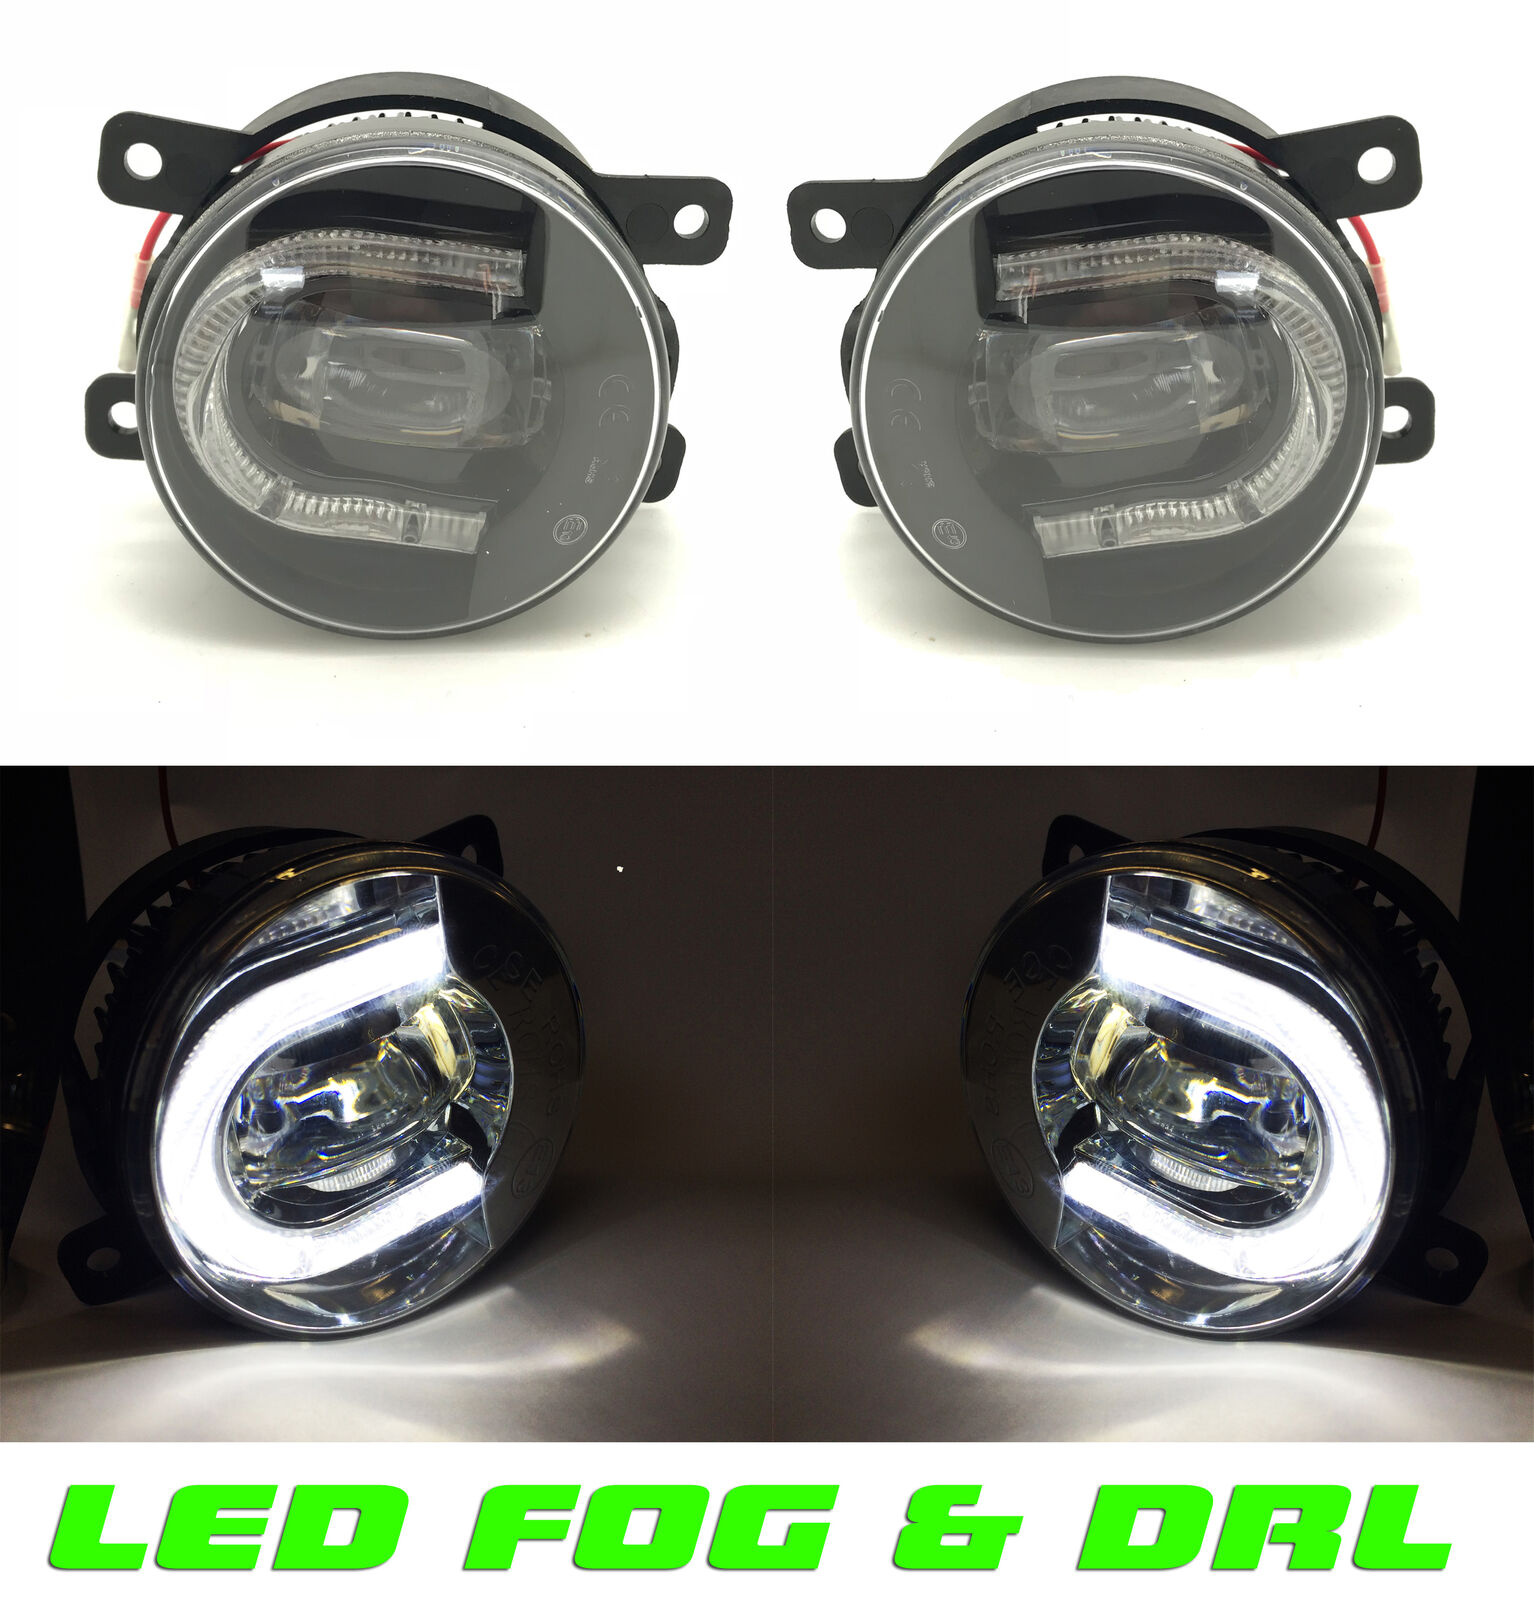 ROYAL STAR TY 2Pcs Car Light for Seat Ibiza 2006 2007 2008 2009 Front Bumper Fog Light Fog Light Without Bulbs Color : Left And Right Side